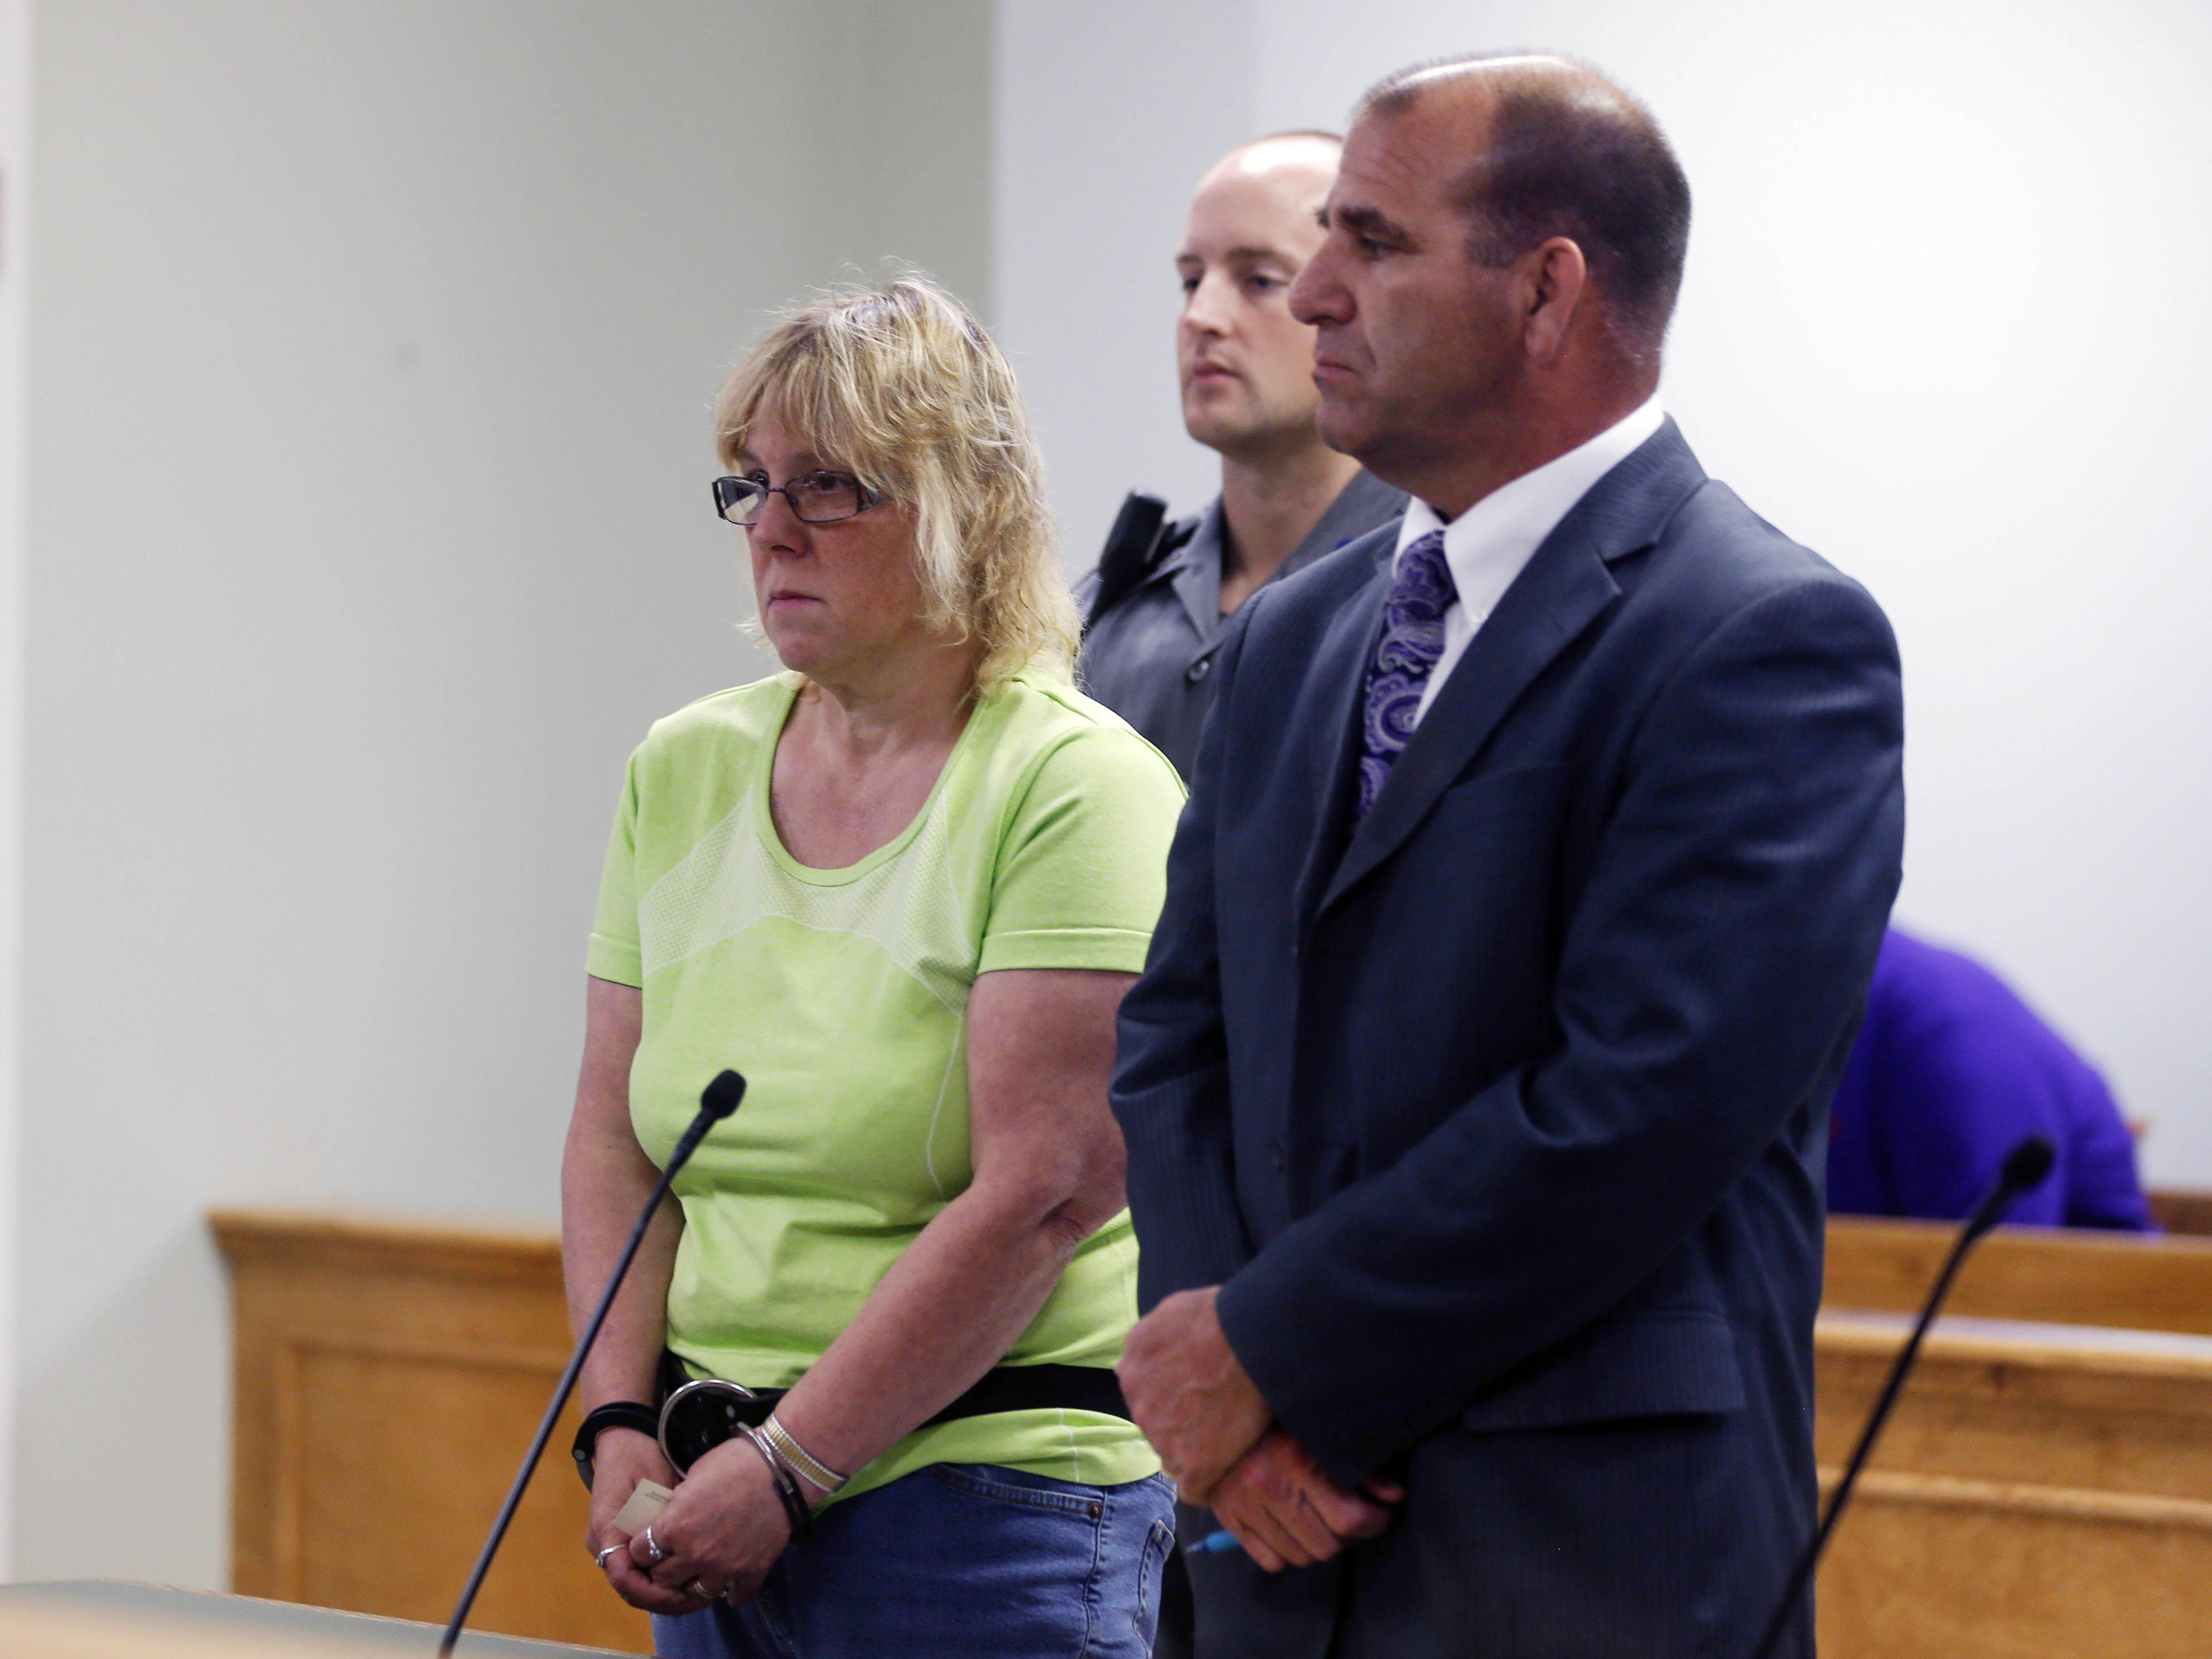 Joyce Mitchell is arraigned in City Court on Friday in Plattsburgh, N.Y. Mitchel is accused of helping two convicted killers escape from Clinton Correctional Facility, where she is an employee. (Photo by Mike Groll/AP)